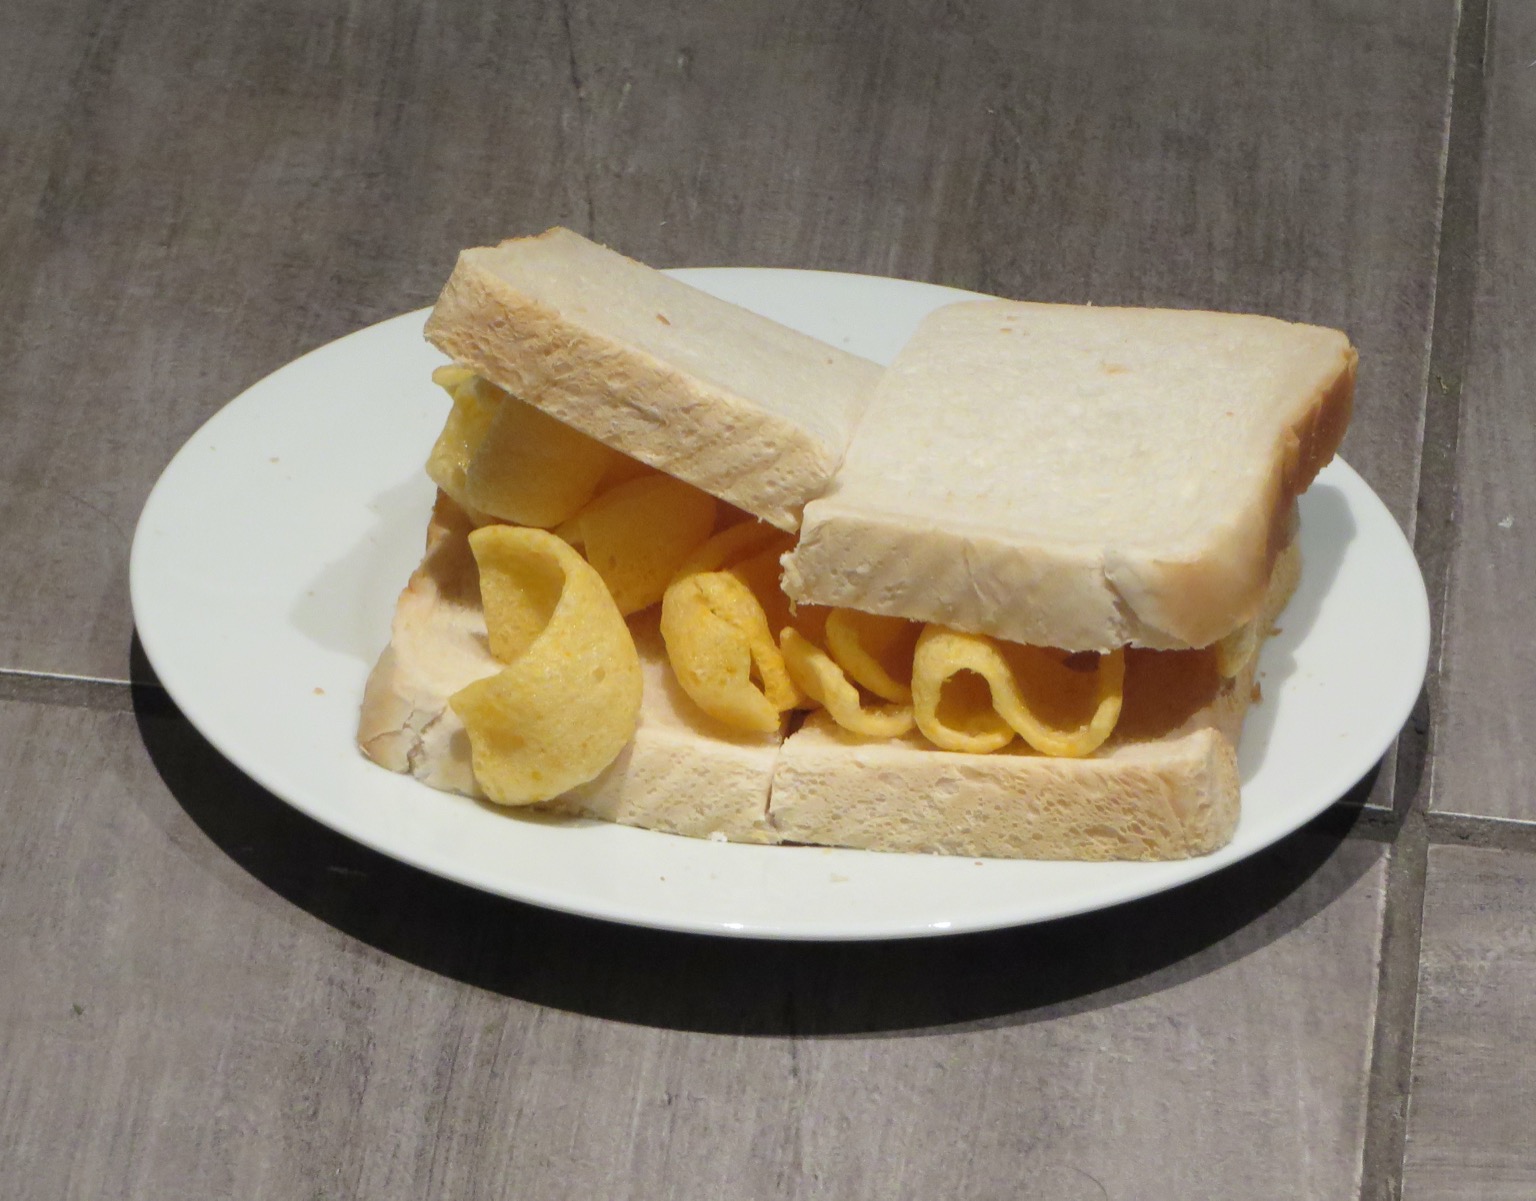 White bread filled with Quavers and cut in half